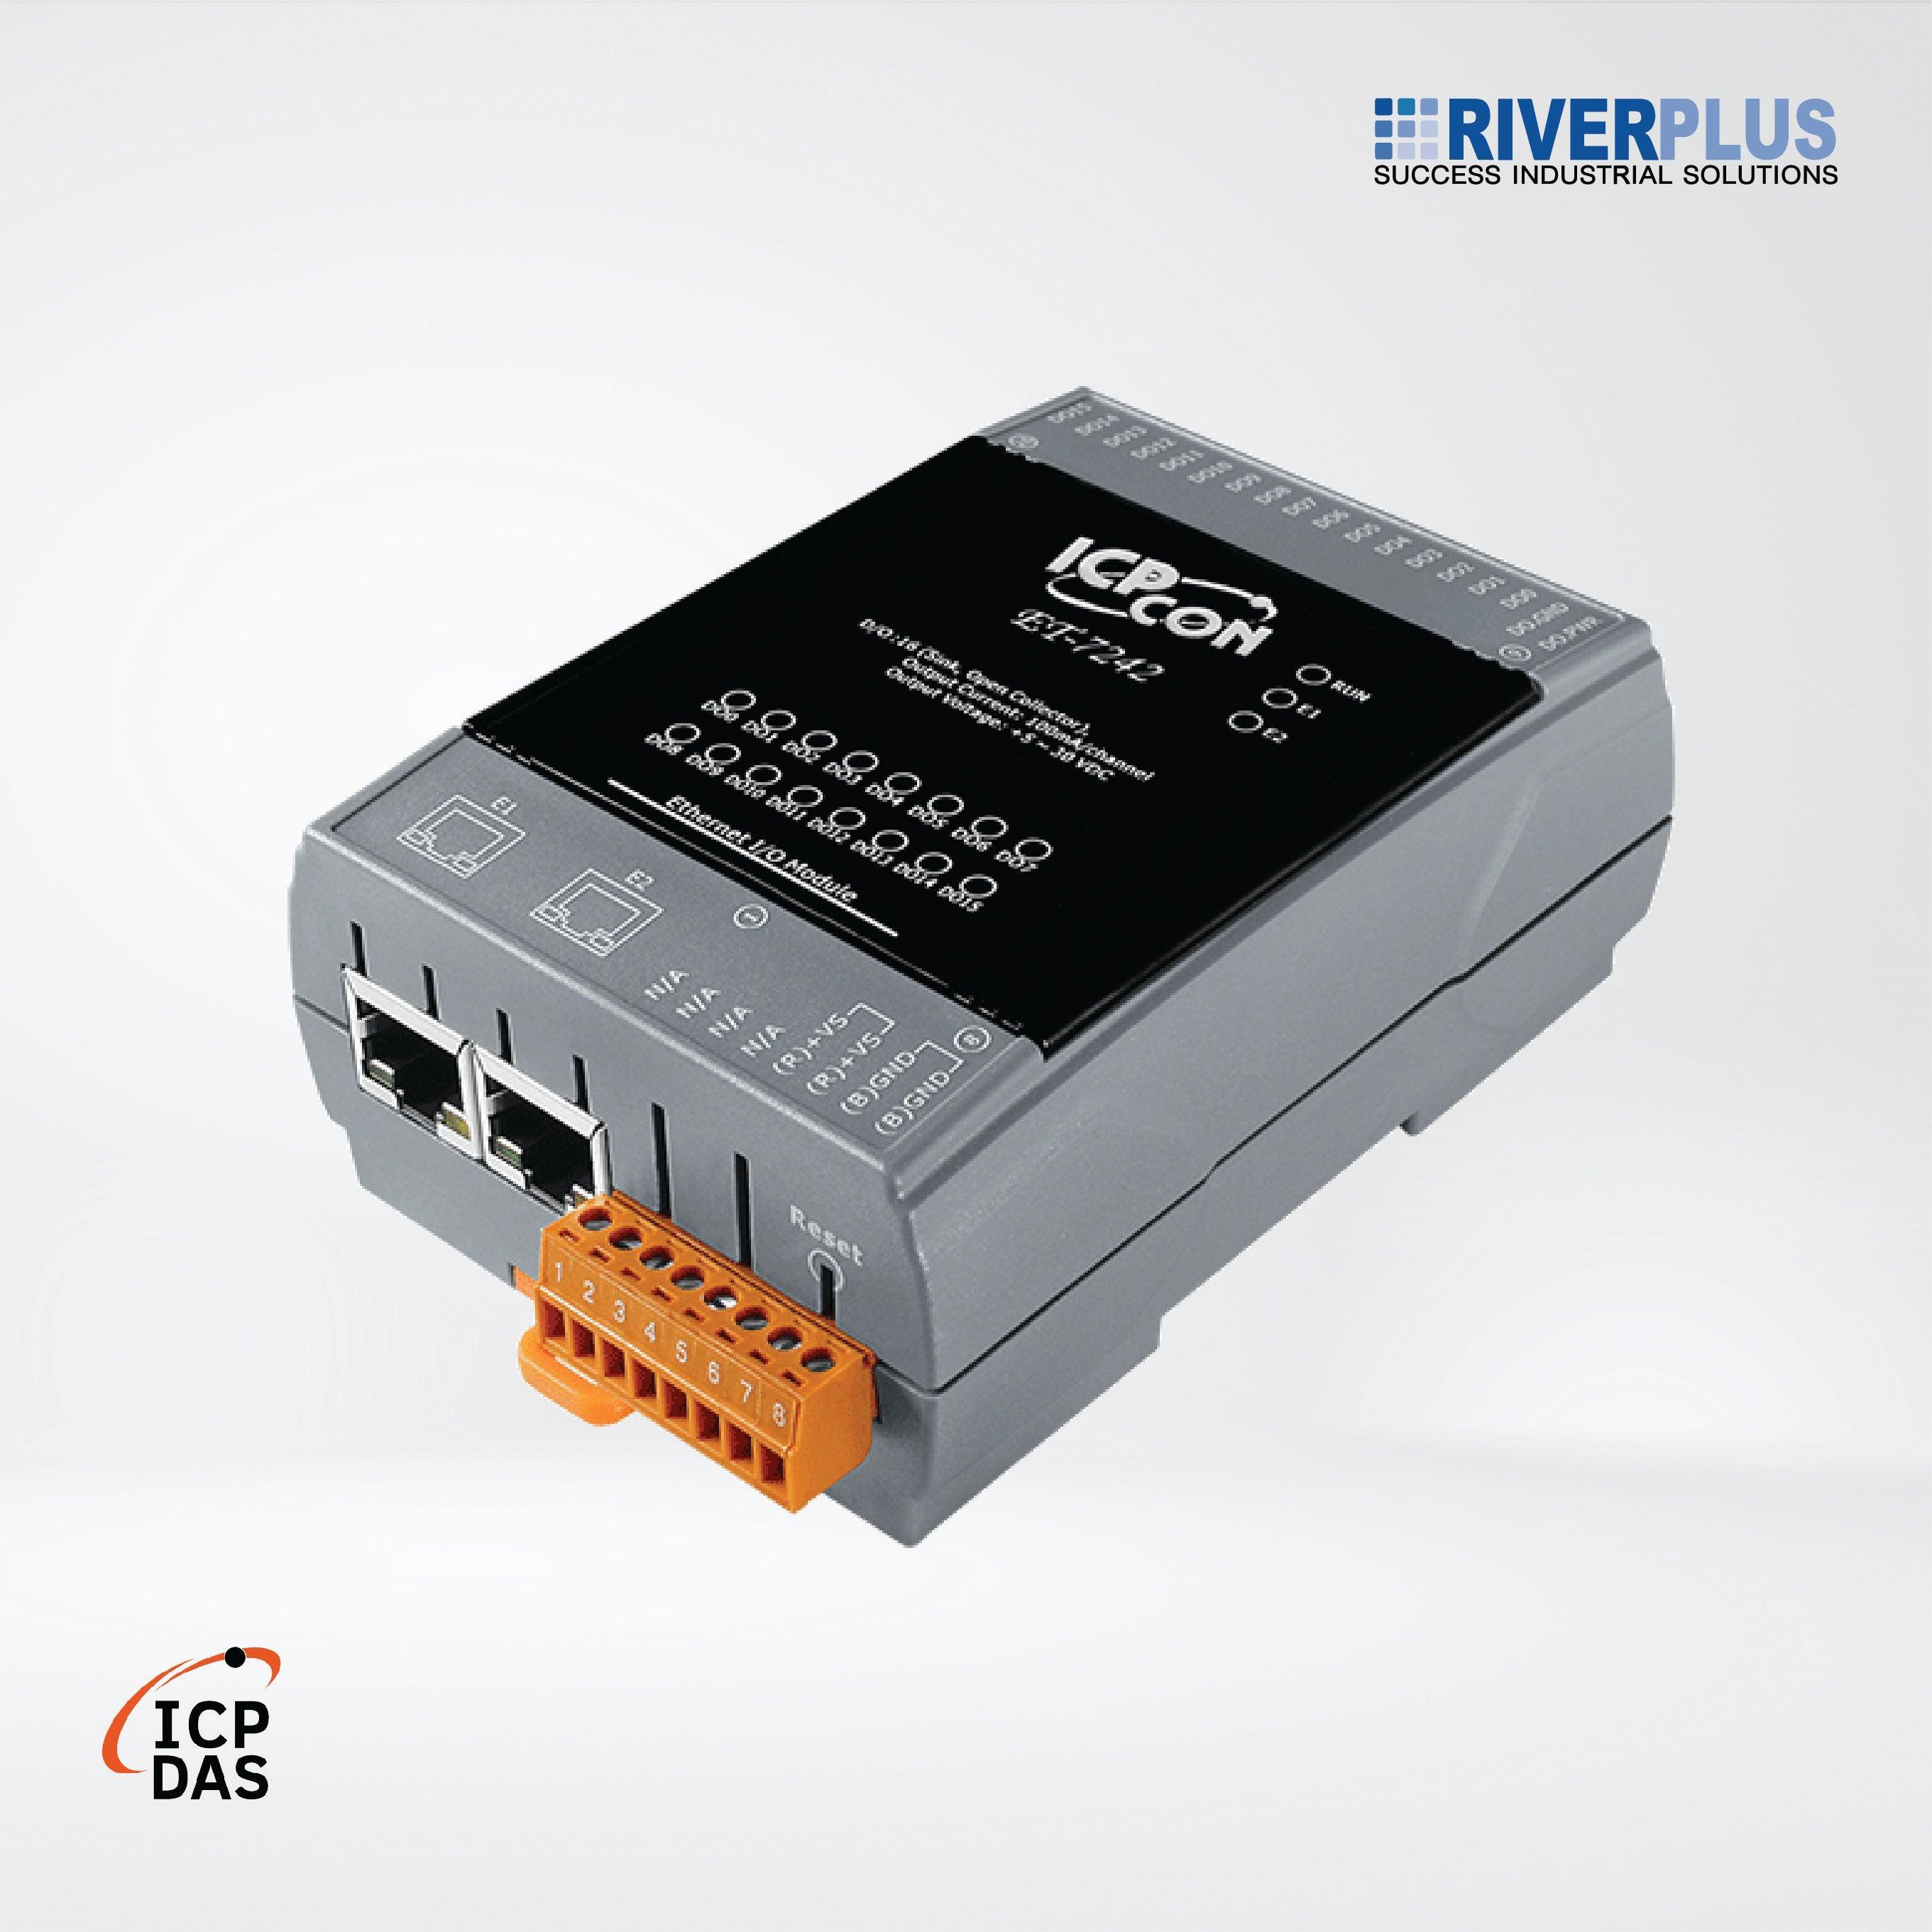 ET-7242 Ethernet I/O Module 2-port Ethernet Switch and 16-ch DO - Riverplus